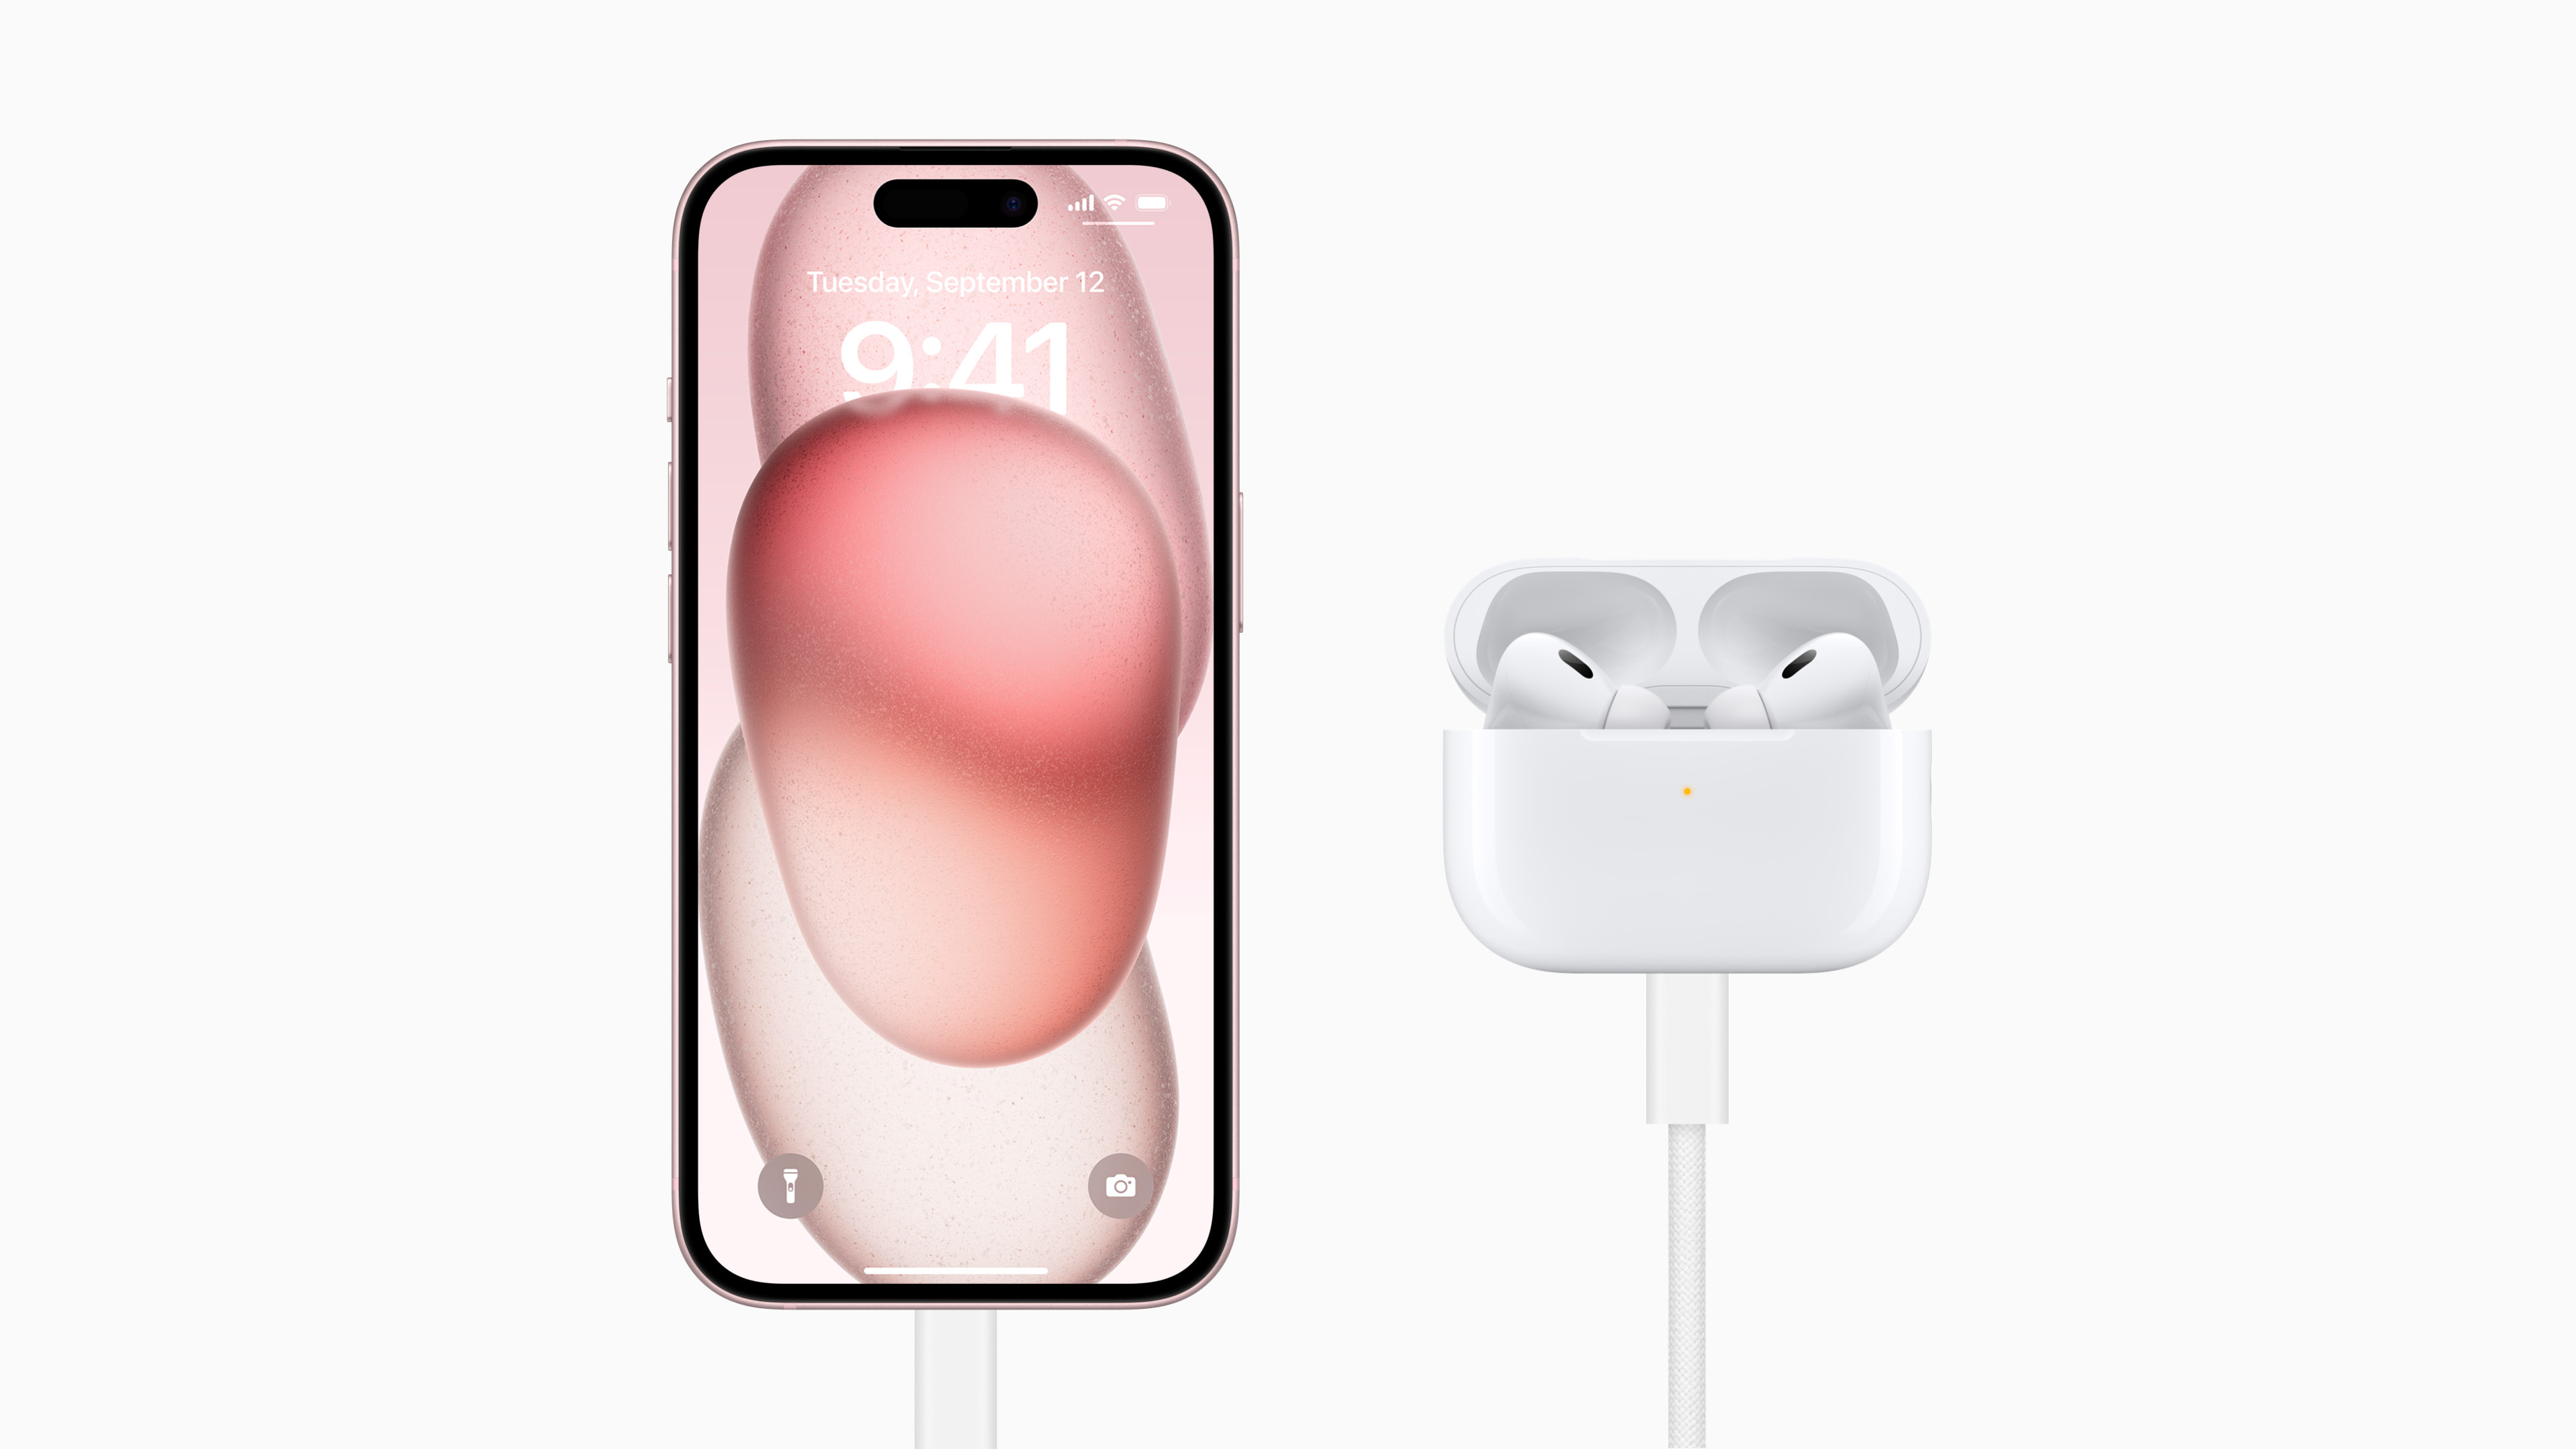 Apple quietly updates AirPods Pro with USB-C, IP54 and Lossless Audio support